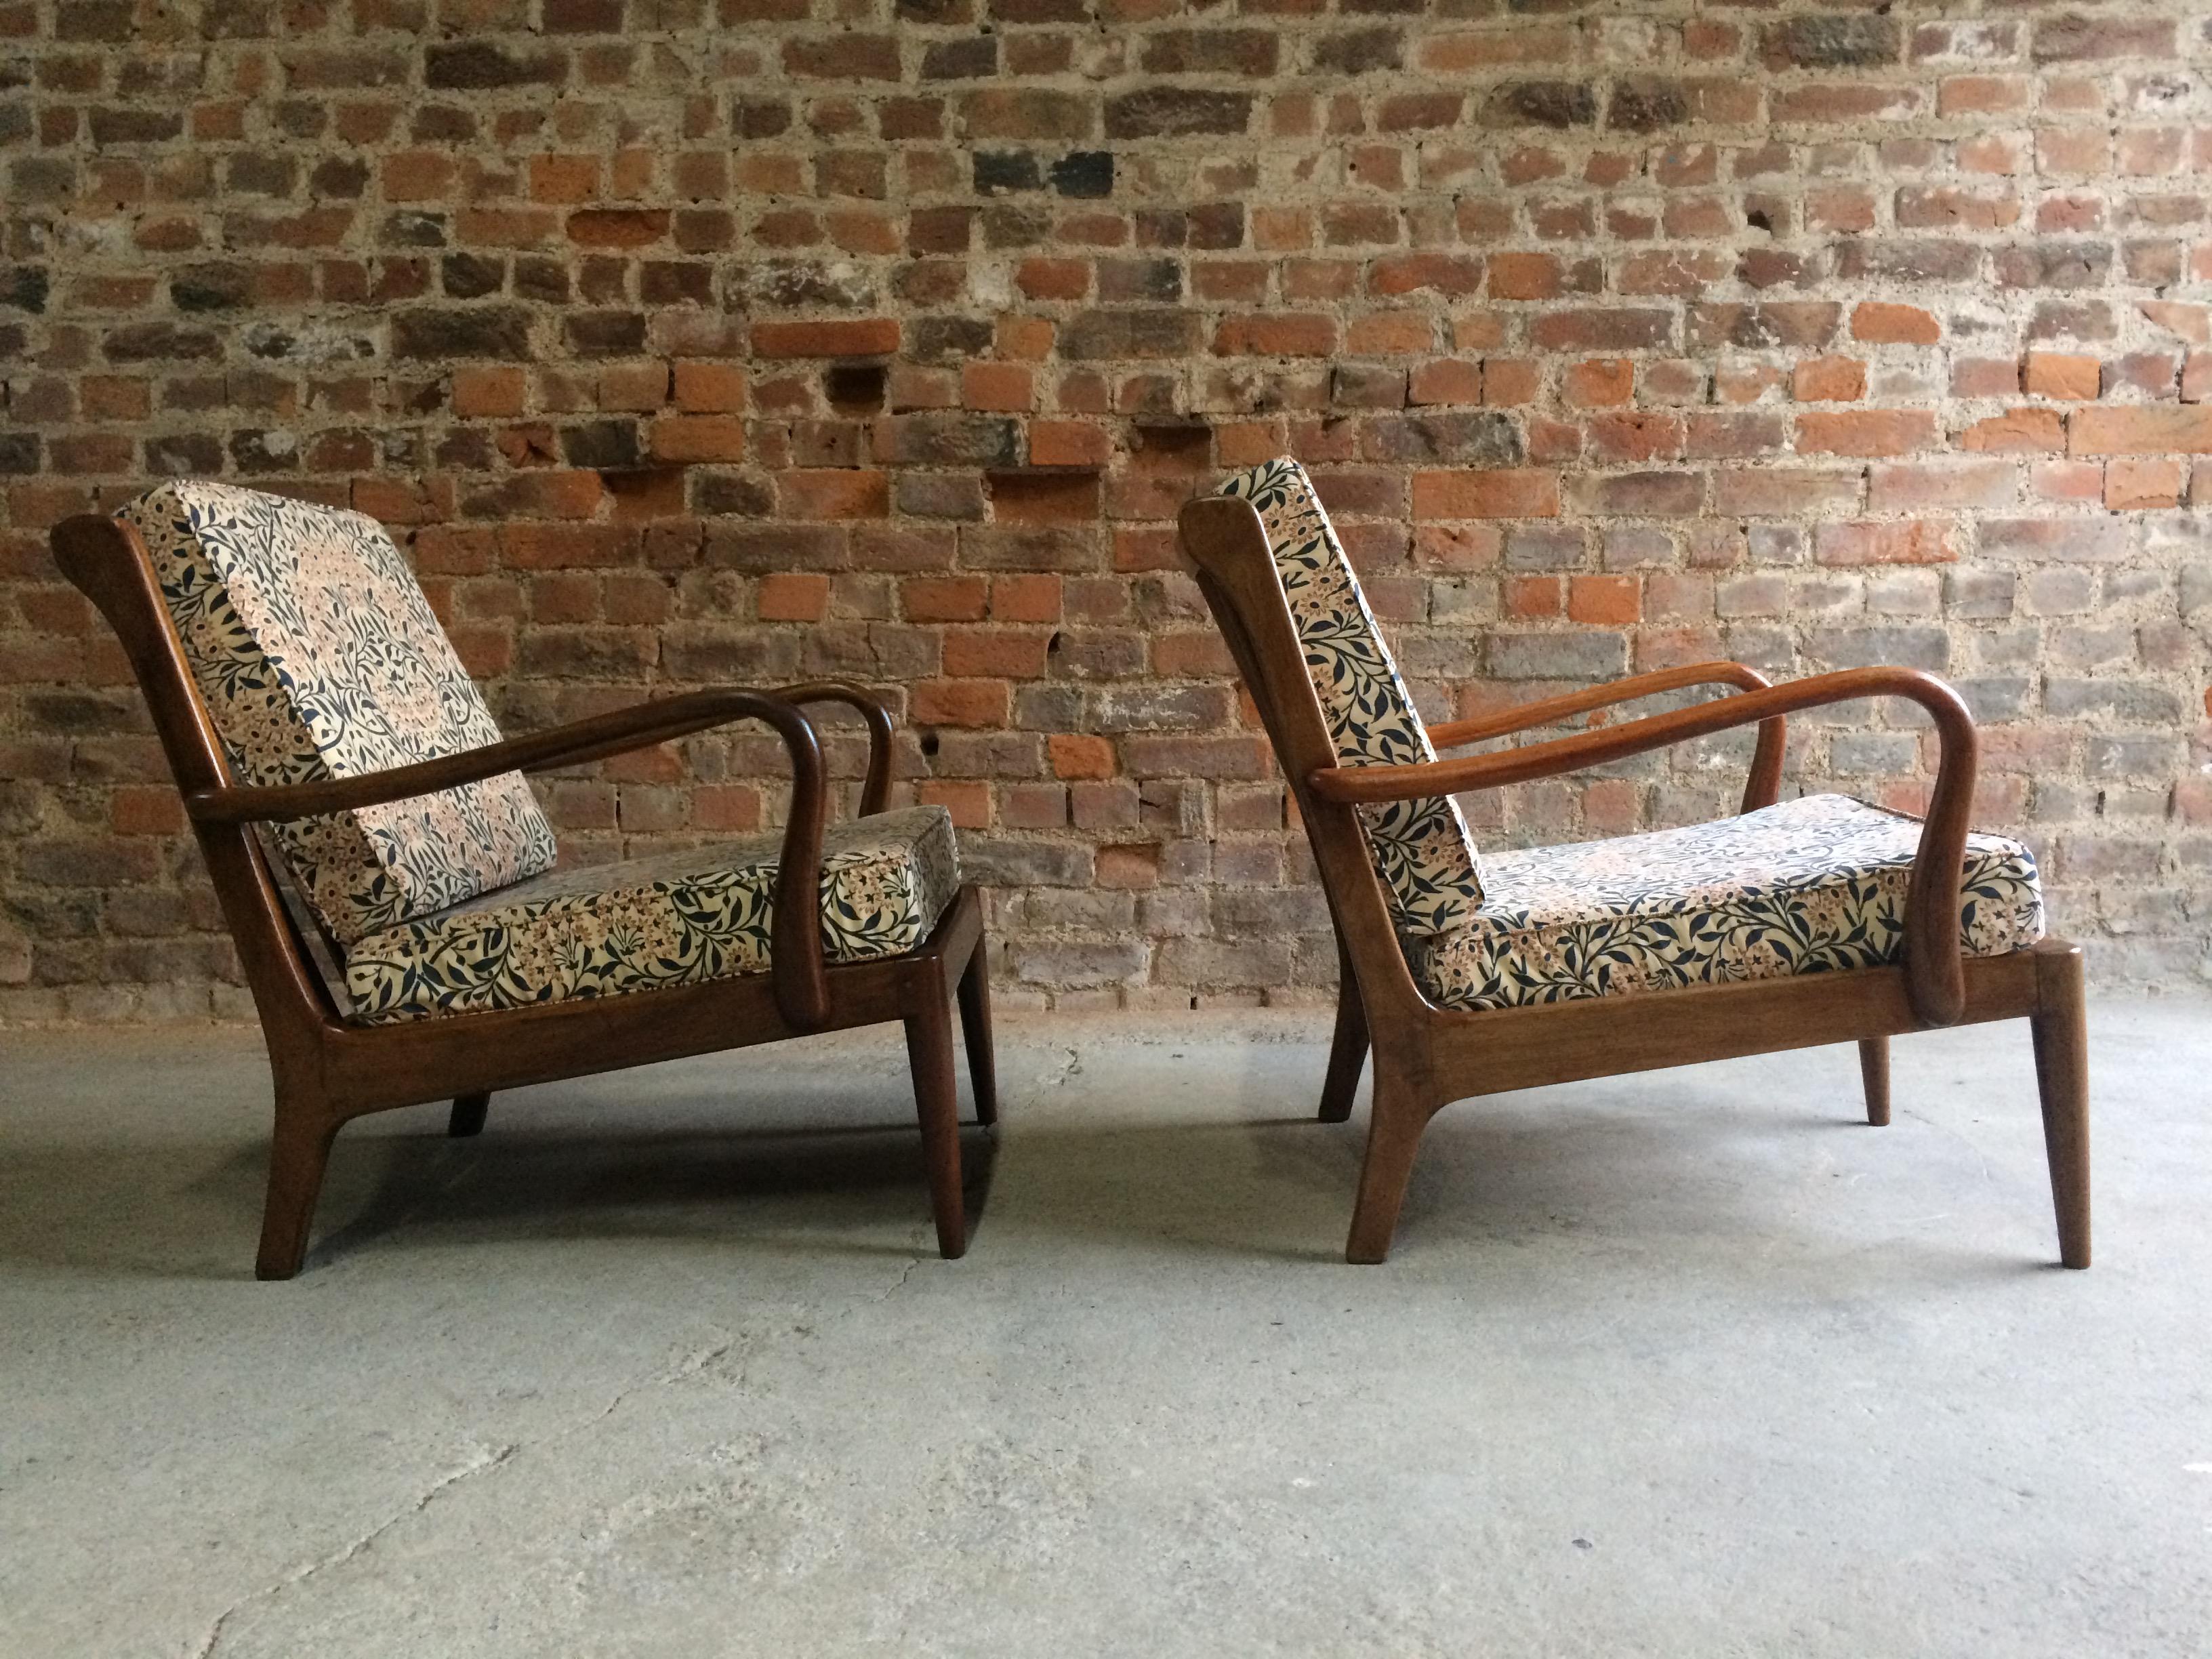 Robert Heritage for George Stone of High Wycombe, exceptionally rare pair of lounge armchairs circa 1960s, the frames constructed from afrormosia wood with William Morris upholstered cushion covers, the sculptural form clearly influenced by the